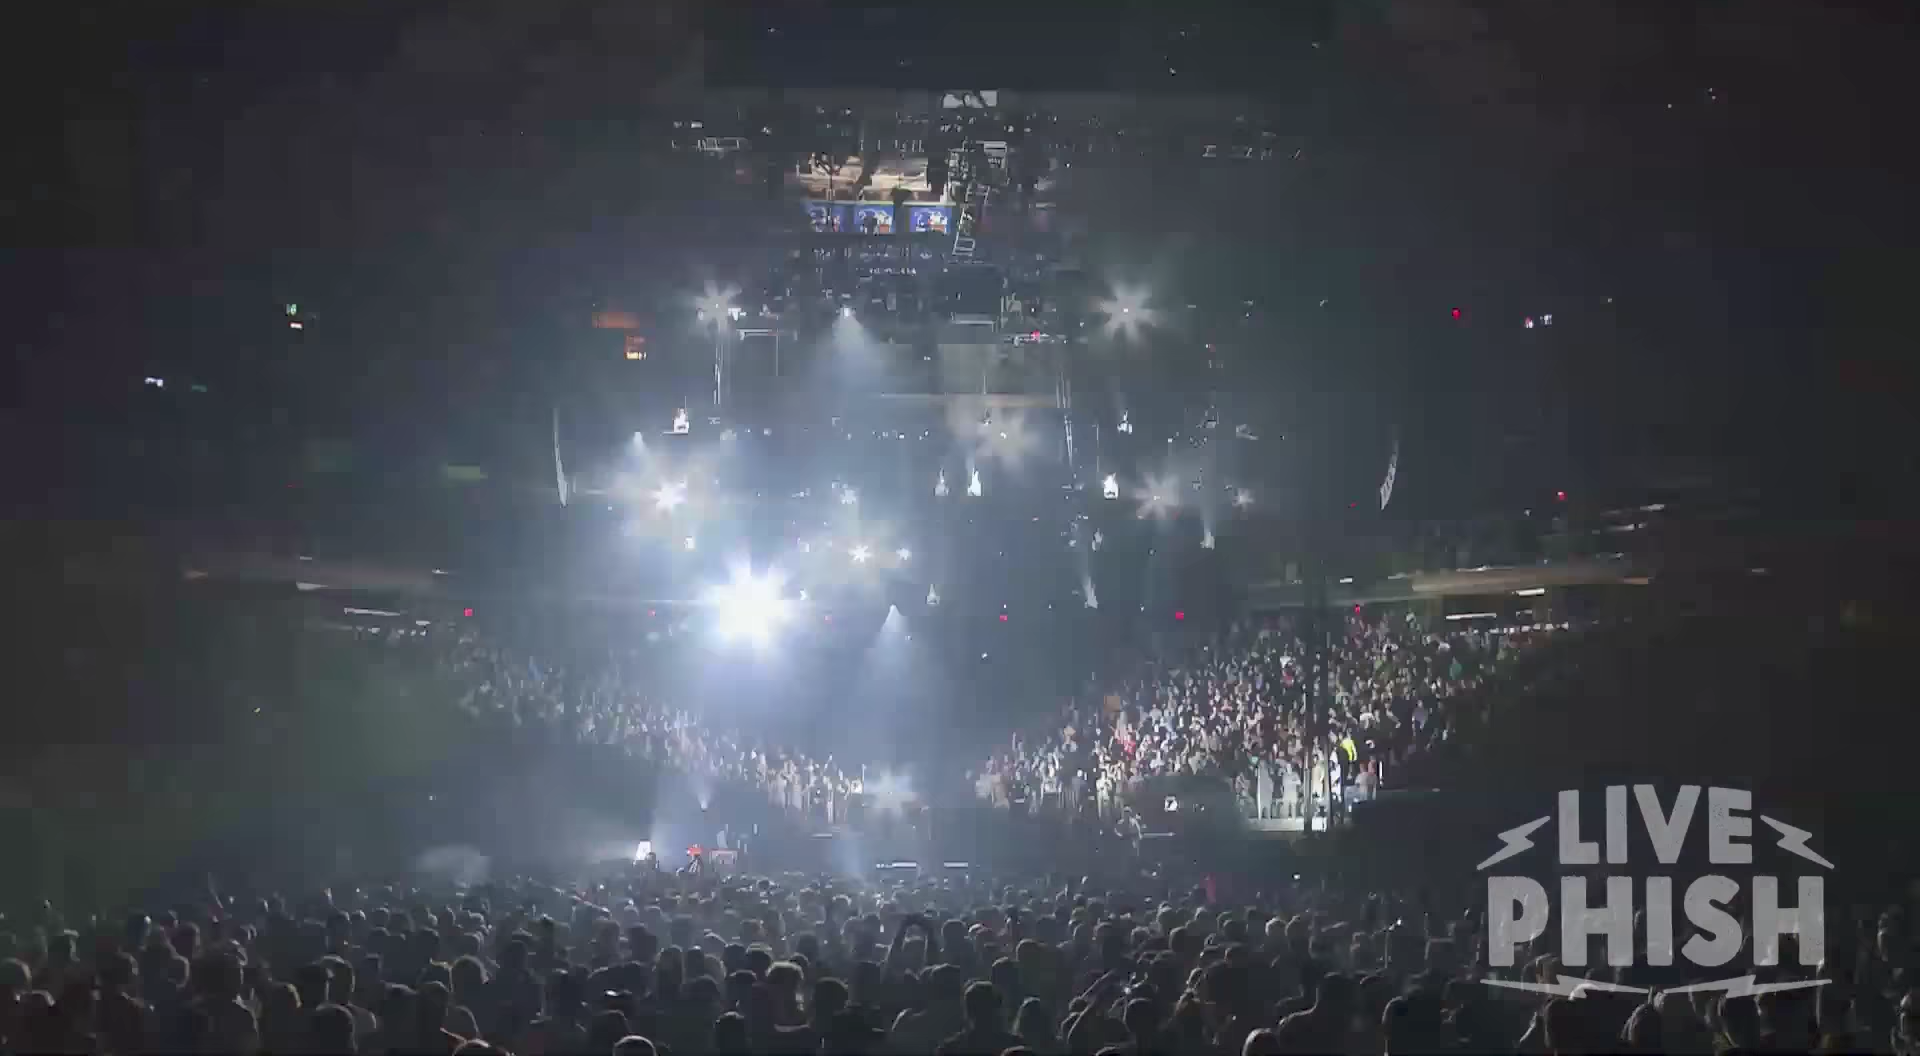 Phish live at Madison Square Garden. Photo by: Phish / YouTube